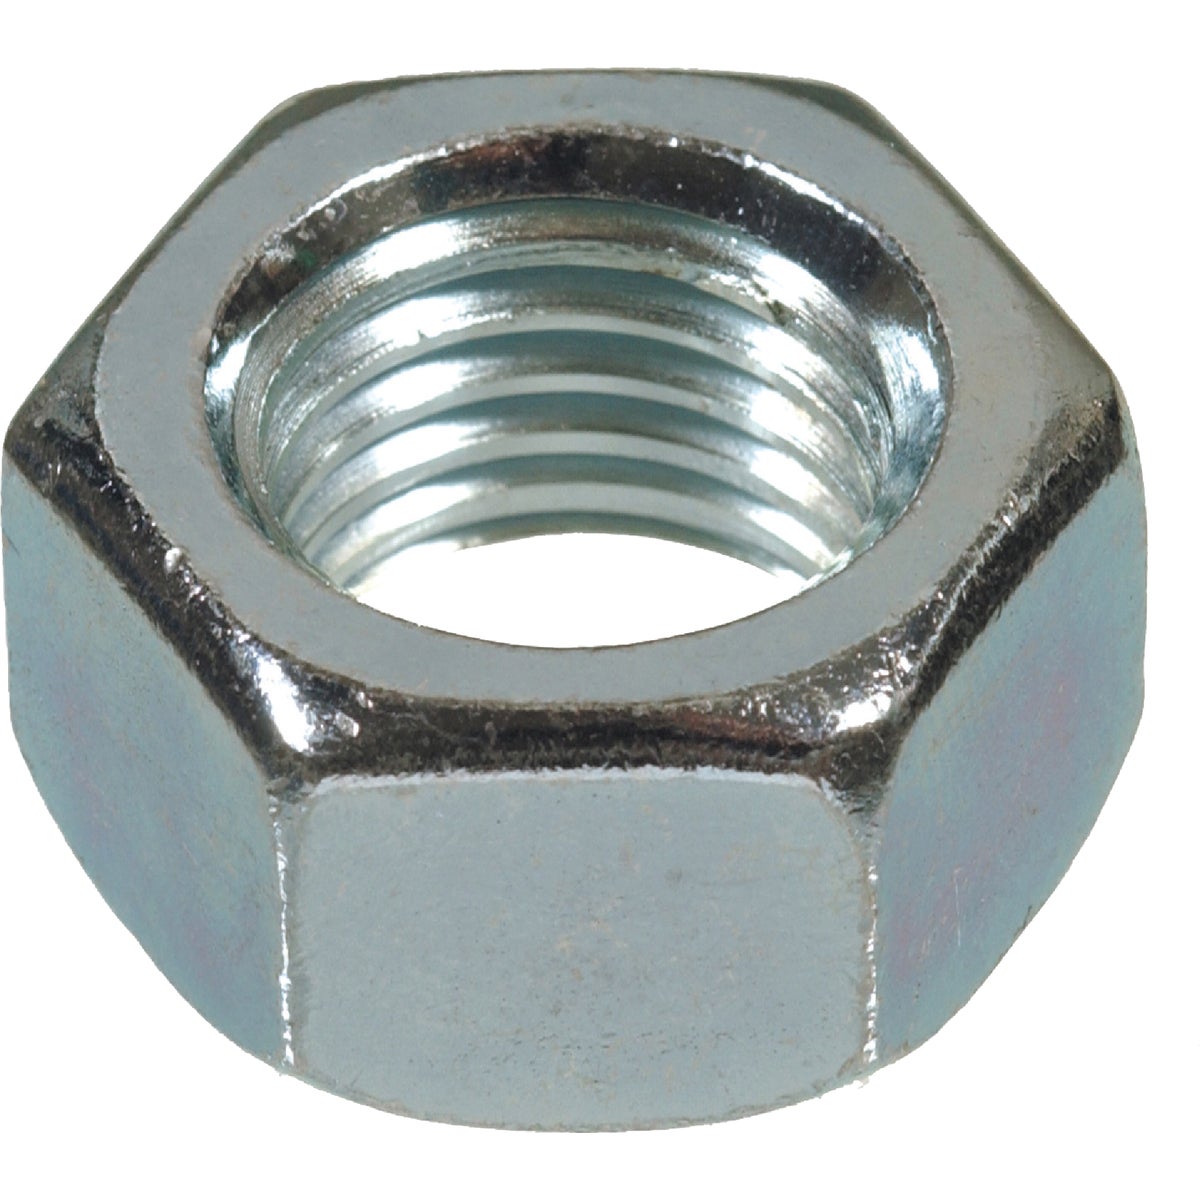 Item 710962, 6-sided hex machine screw nuts are available in smaller sizes than full hex